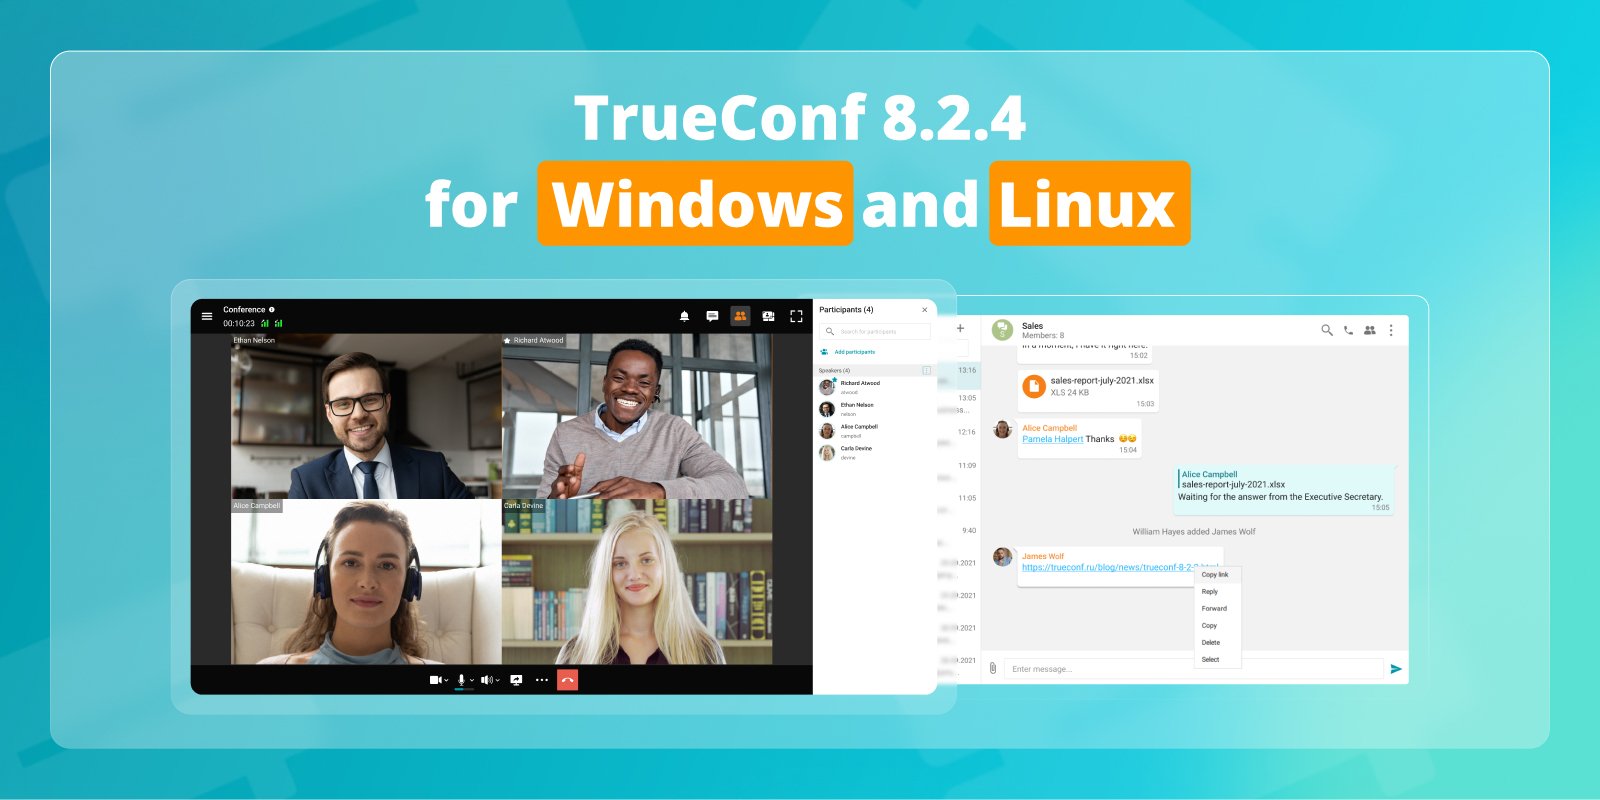 TrueConf 8.2.4 for Windows and Linux: Updates and improvements 2